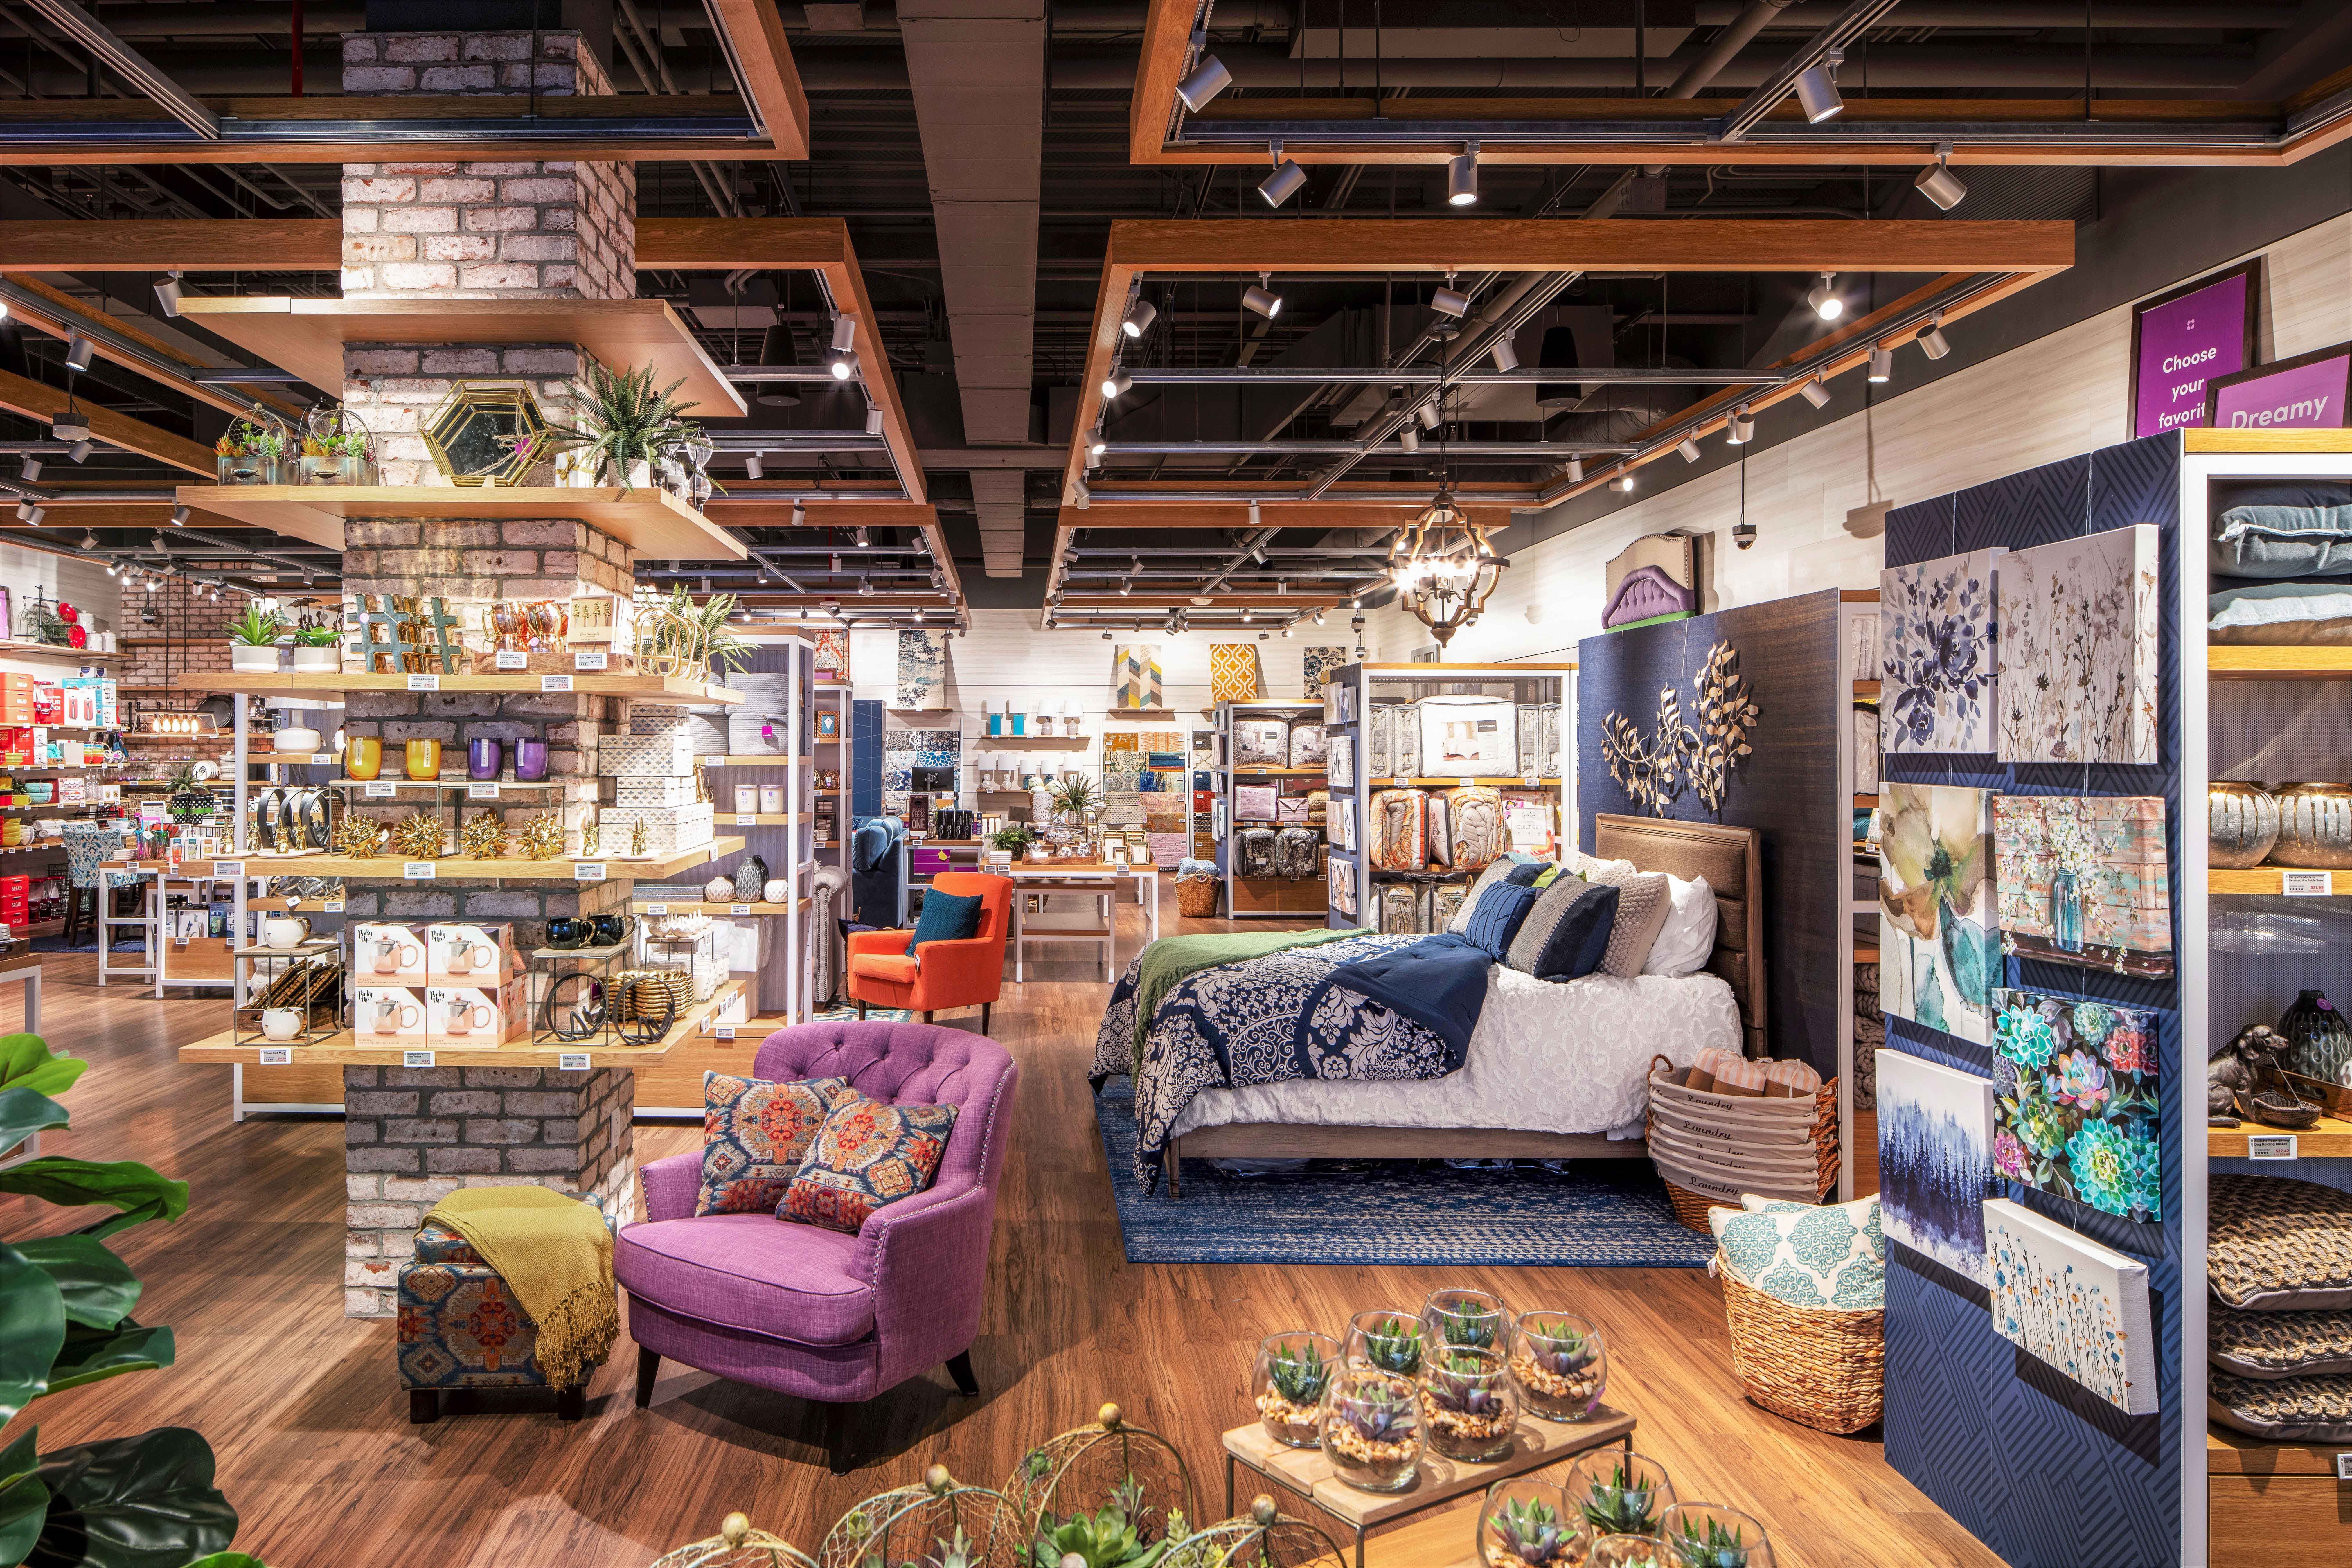 20 Best Home Decoration Stores: Reviews and Recommendations in